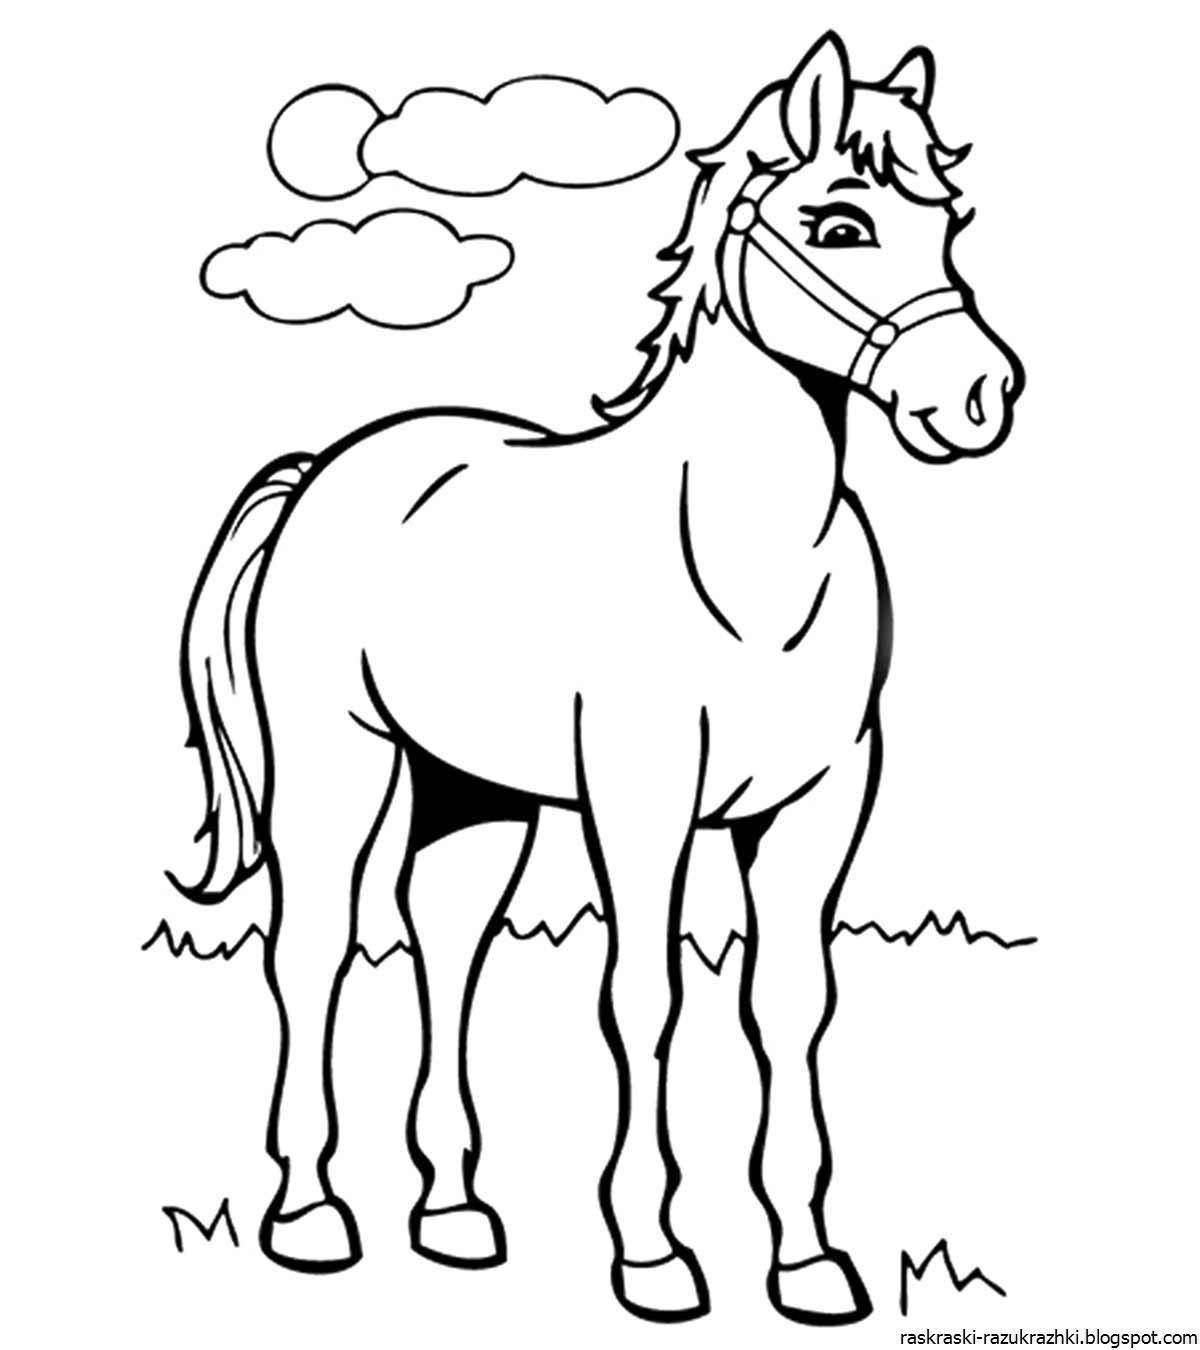 Major horse coloring book for 5-6 year olds